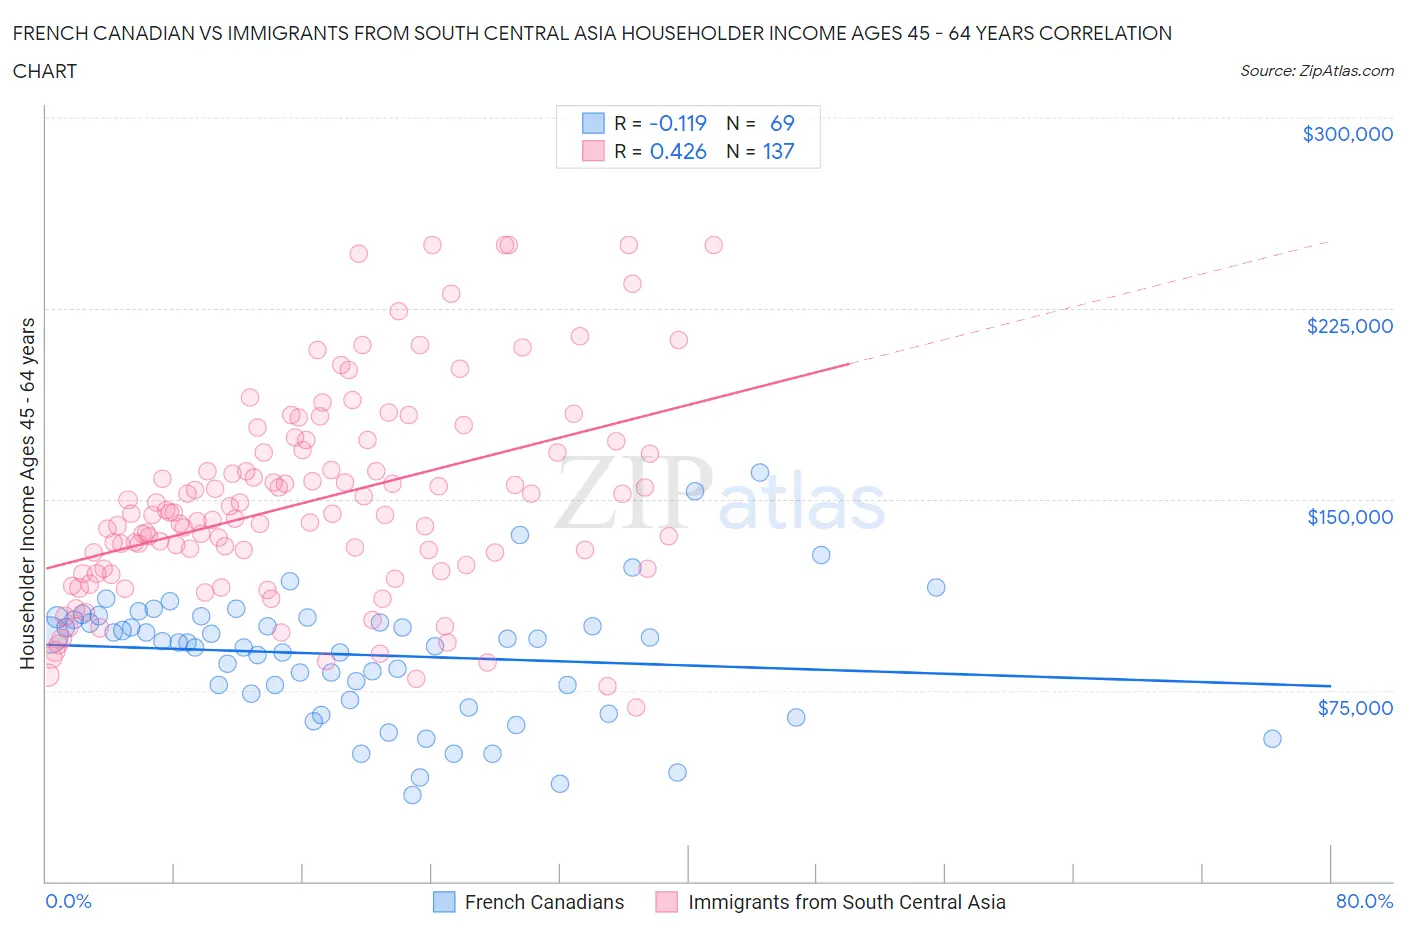 French Canadian vs Immigrants from South Central Asia Householder Income Ages 45 - 64 years